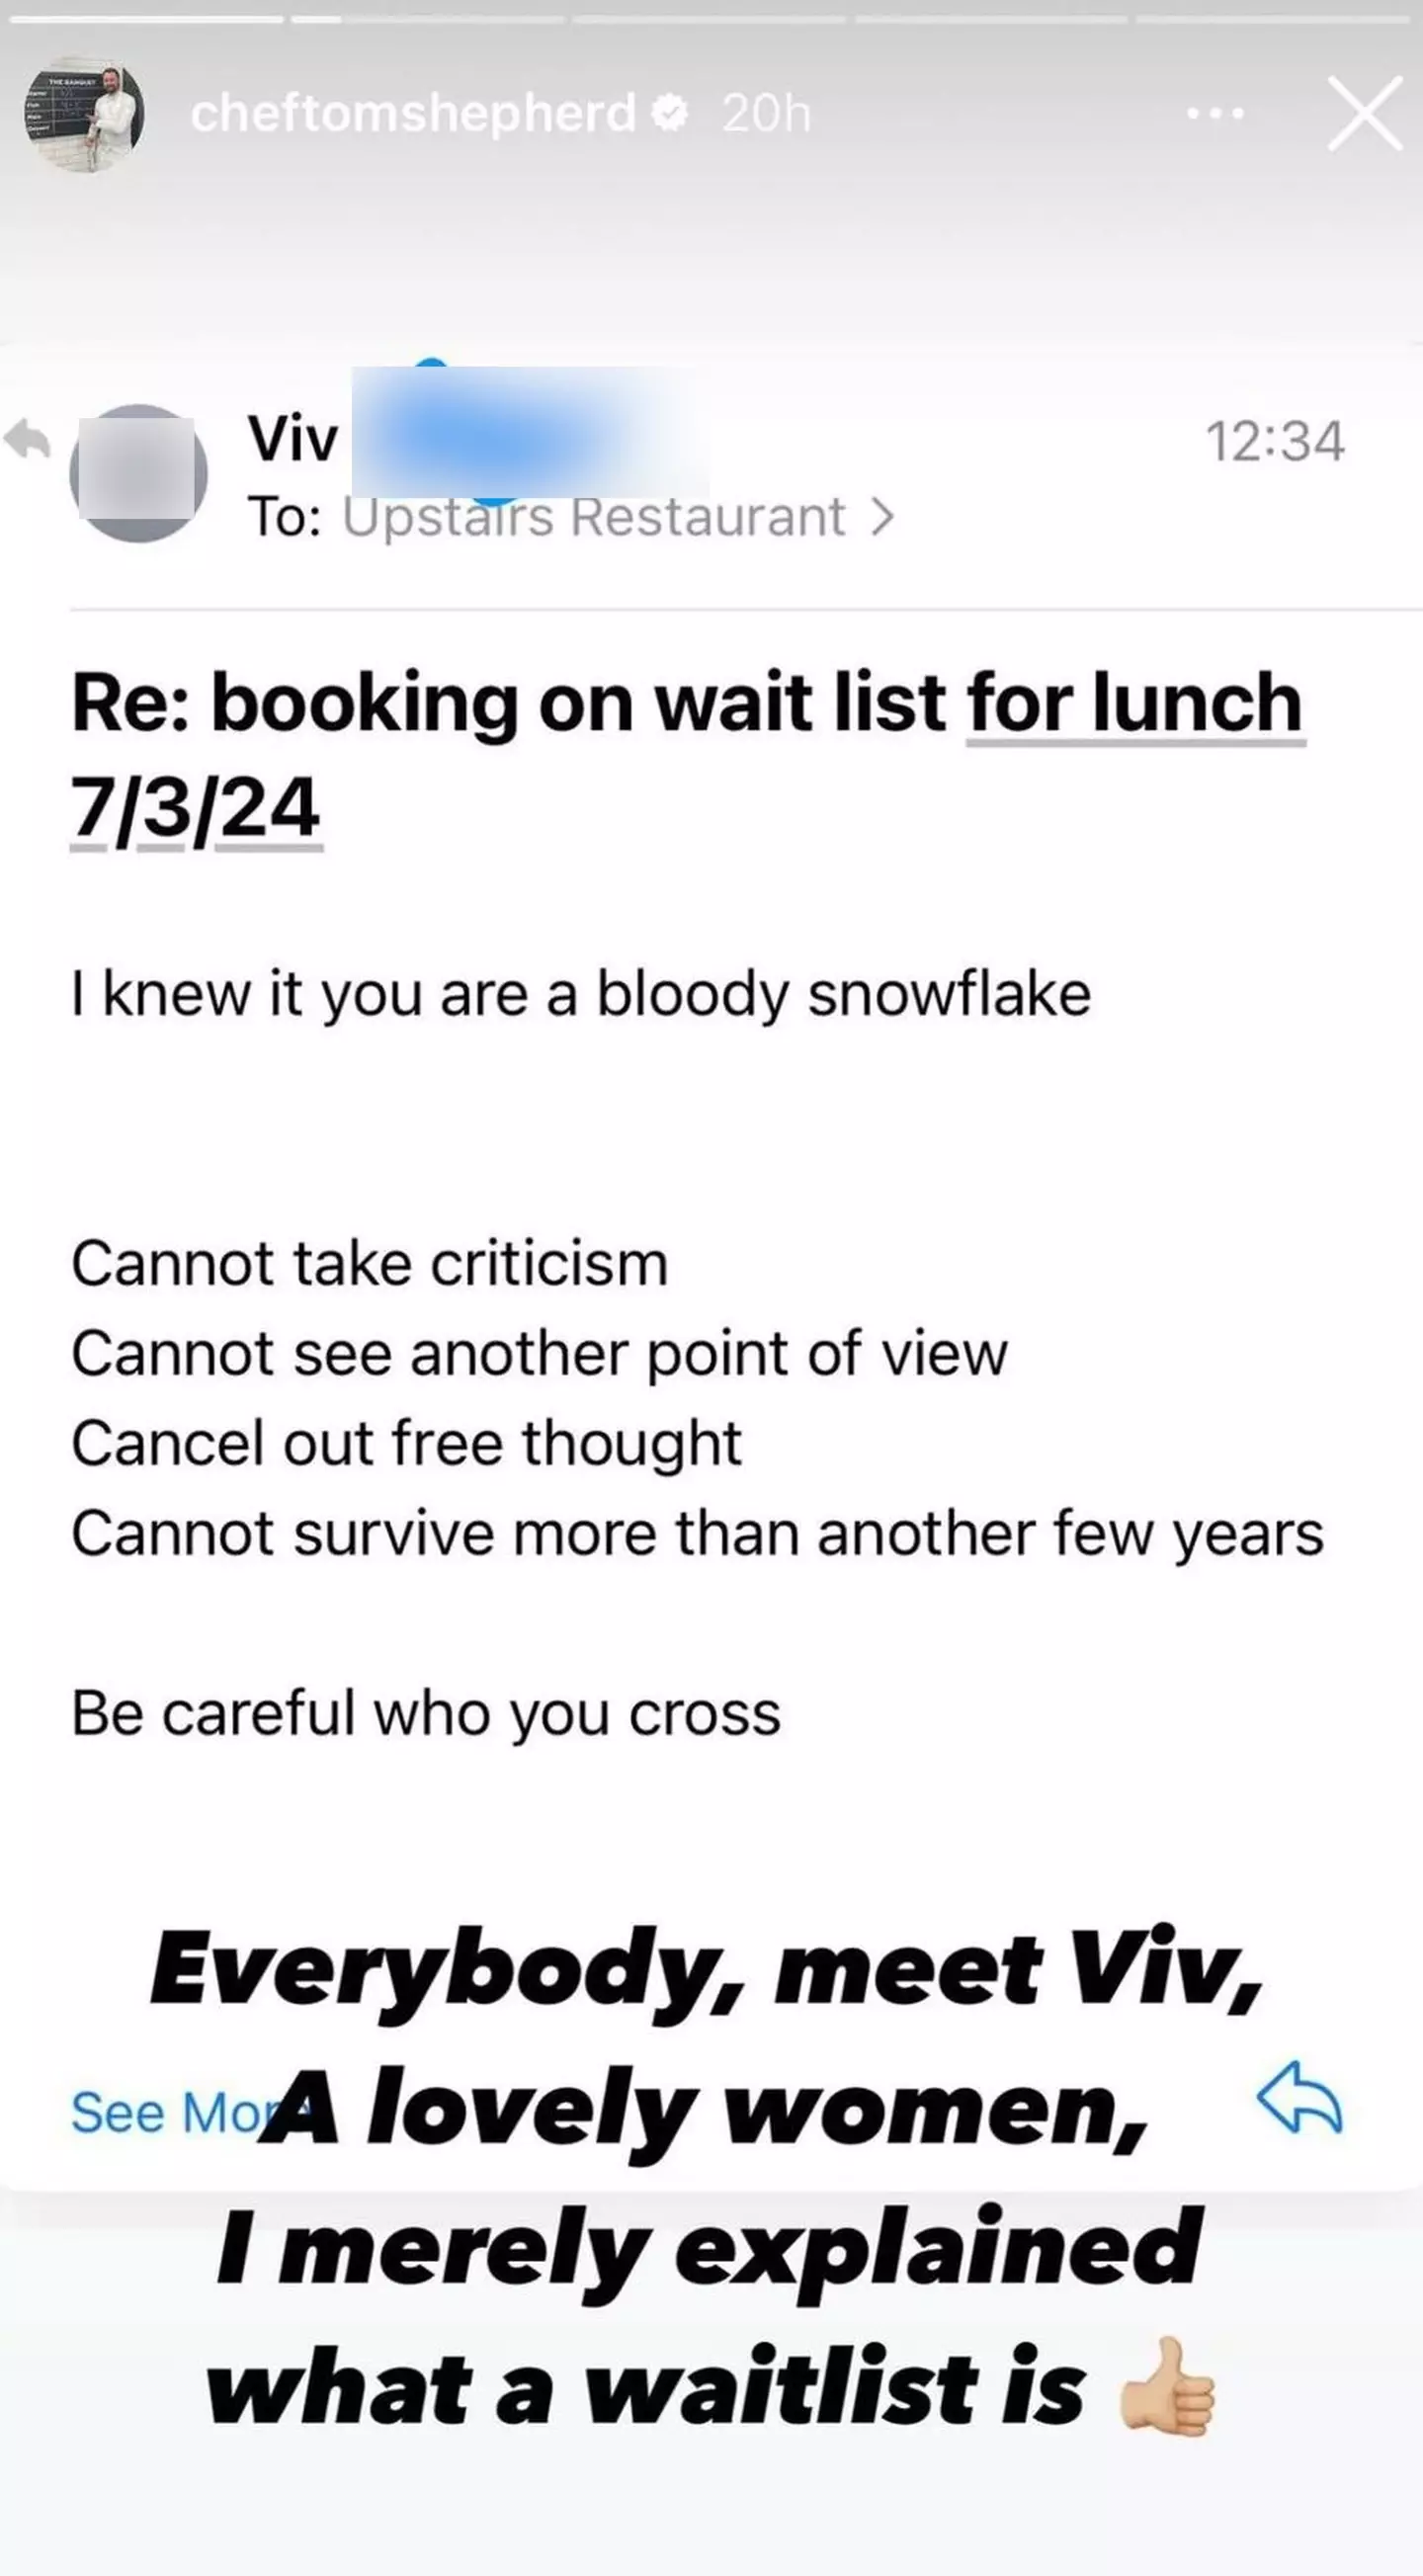 'Viv' sent an angry email to the chef over his restaurant's wait times.